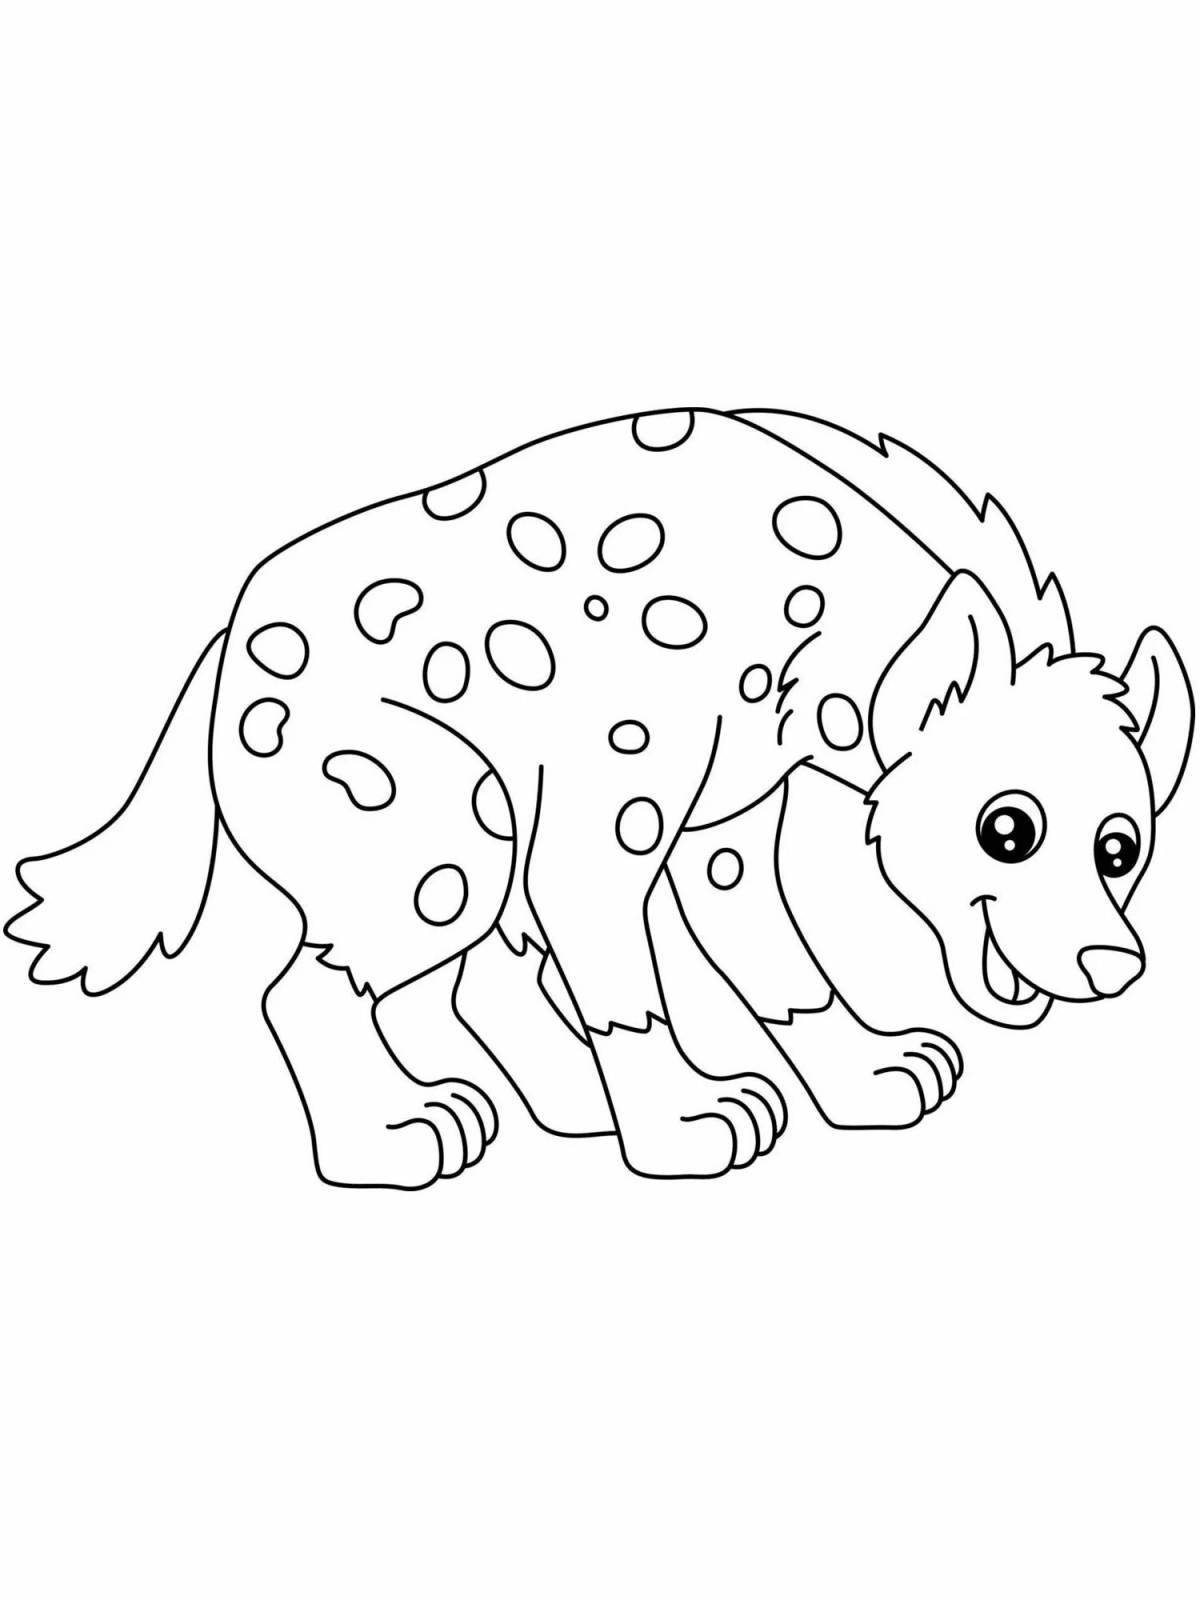 Coloring book exquisite striped hyena